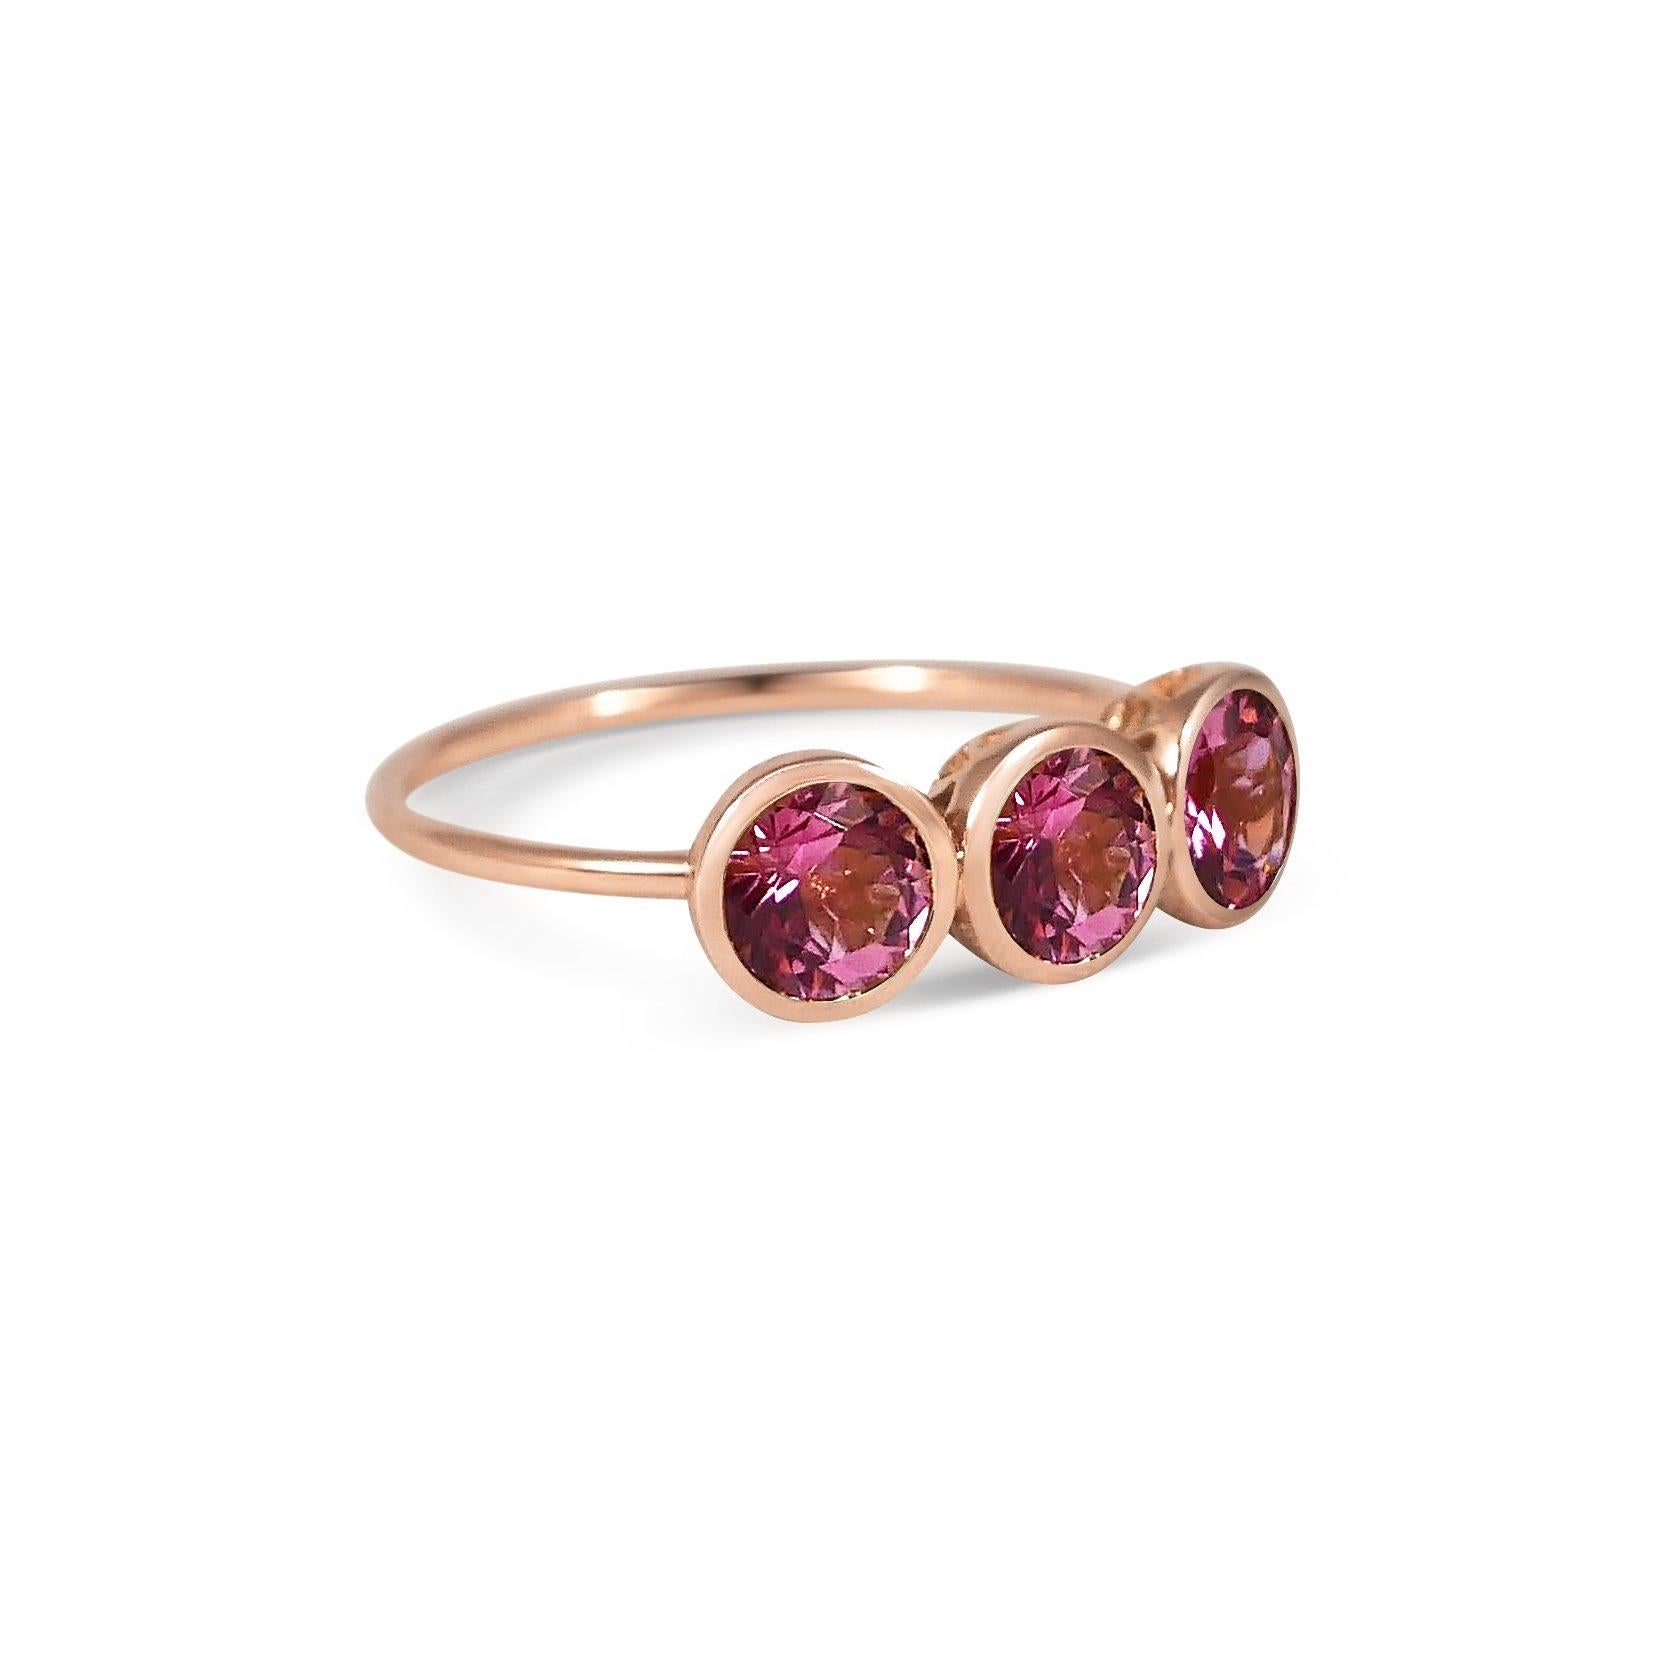 For Sale:  Handcrafted 1.50 Carats Pink Tourmalines 18 Karat Rose Gold Three-Stone Ring 3